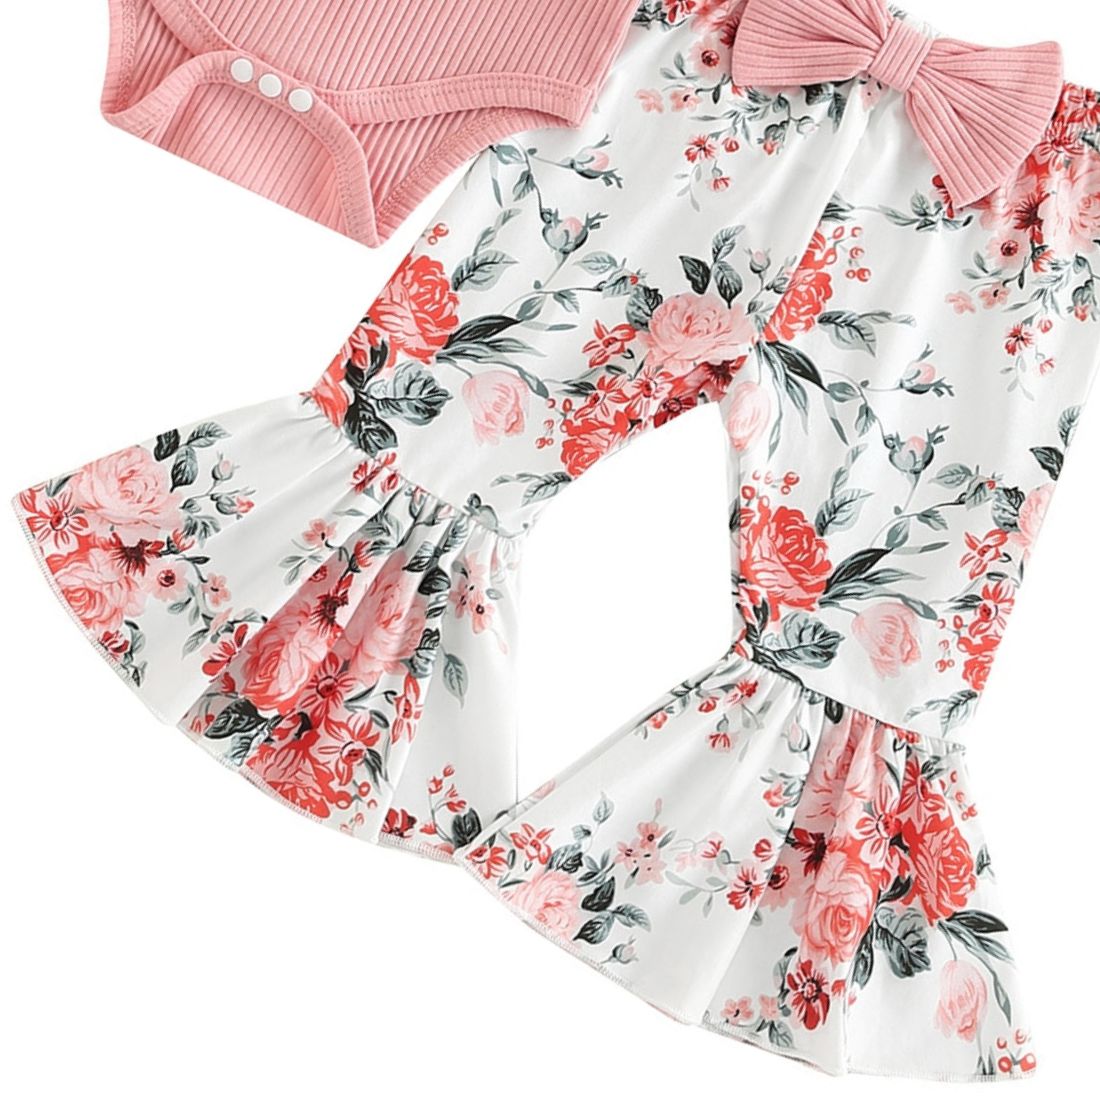 Baby Girl Pink Long Sleeved Ribbed Bodysuit paired with Floral Flares featuring a Big Bow Clothing Set - My Trendy Youngsters | Buy on-trend and stylish Baby and Toddler Clothing Sets @ My Trendy Youngsters - Dress your little one in Style @ My Trendy Youngsters 